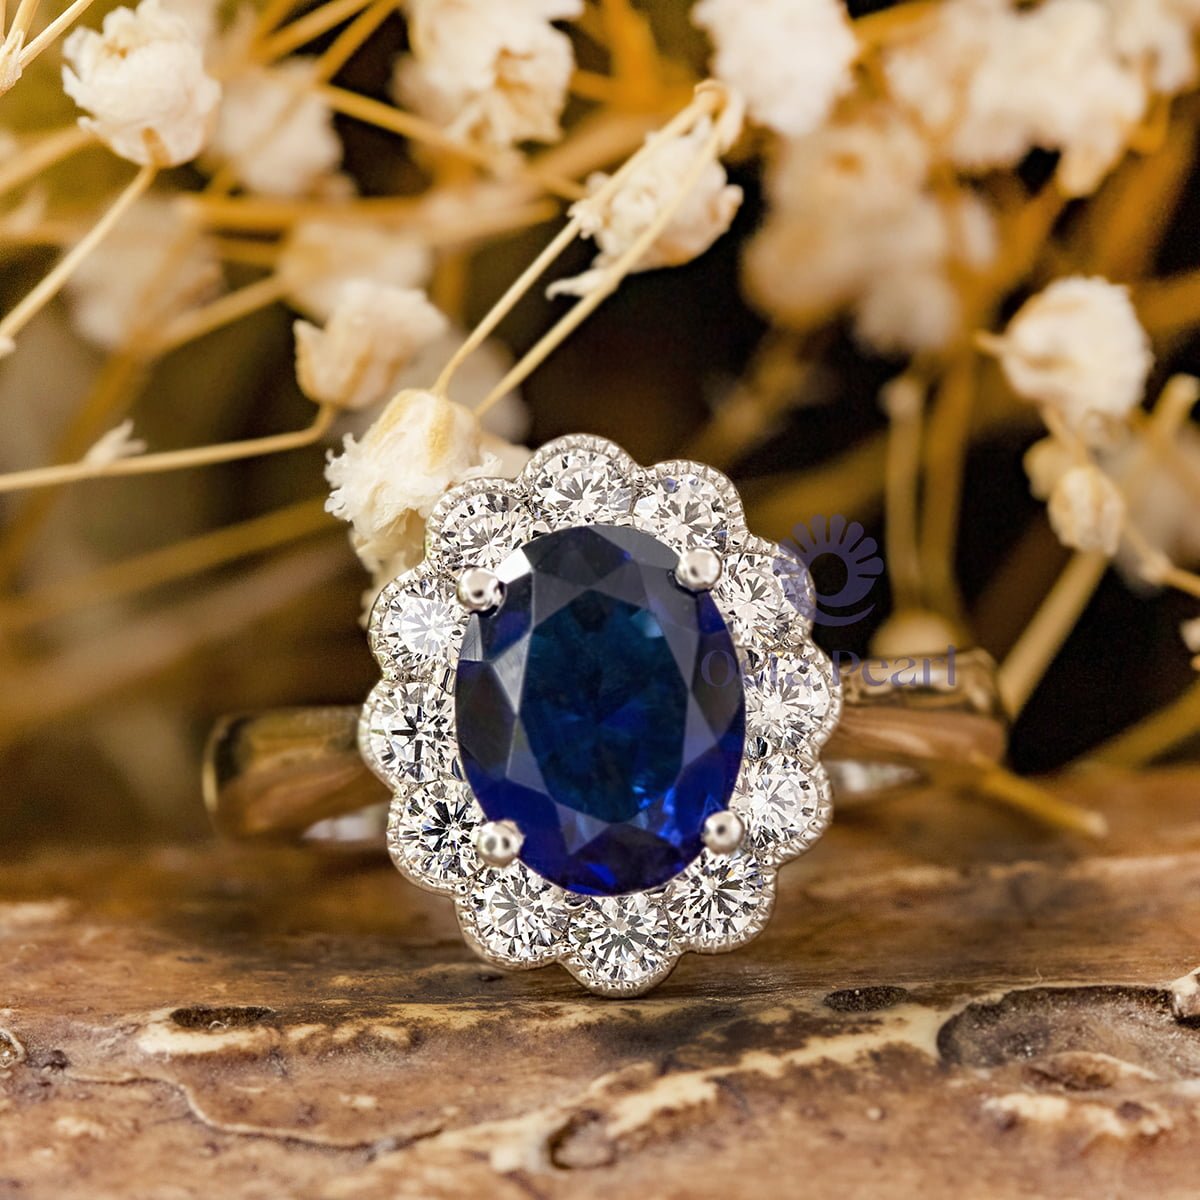 Oval Sapphire Engagement Ring with Diamond Floral Halo